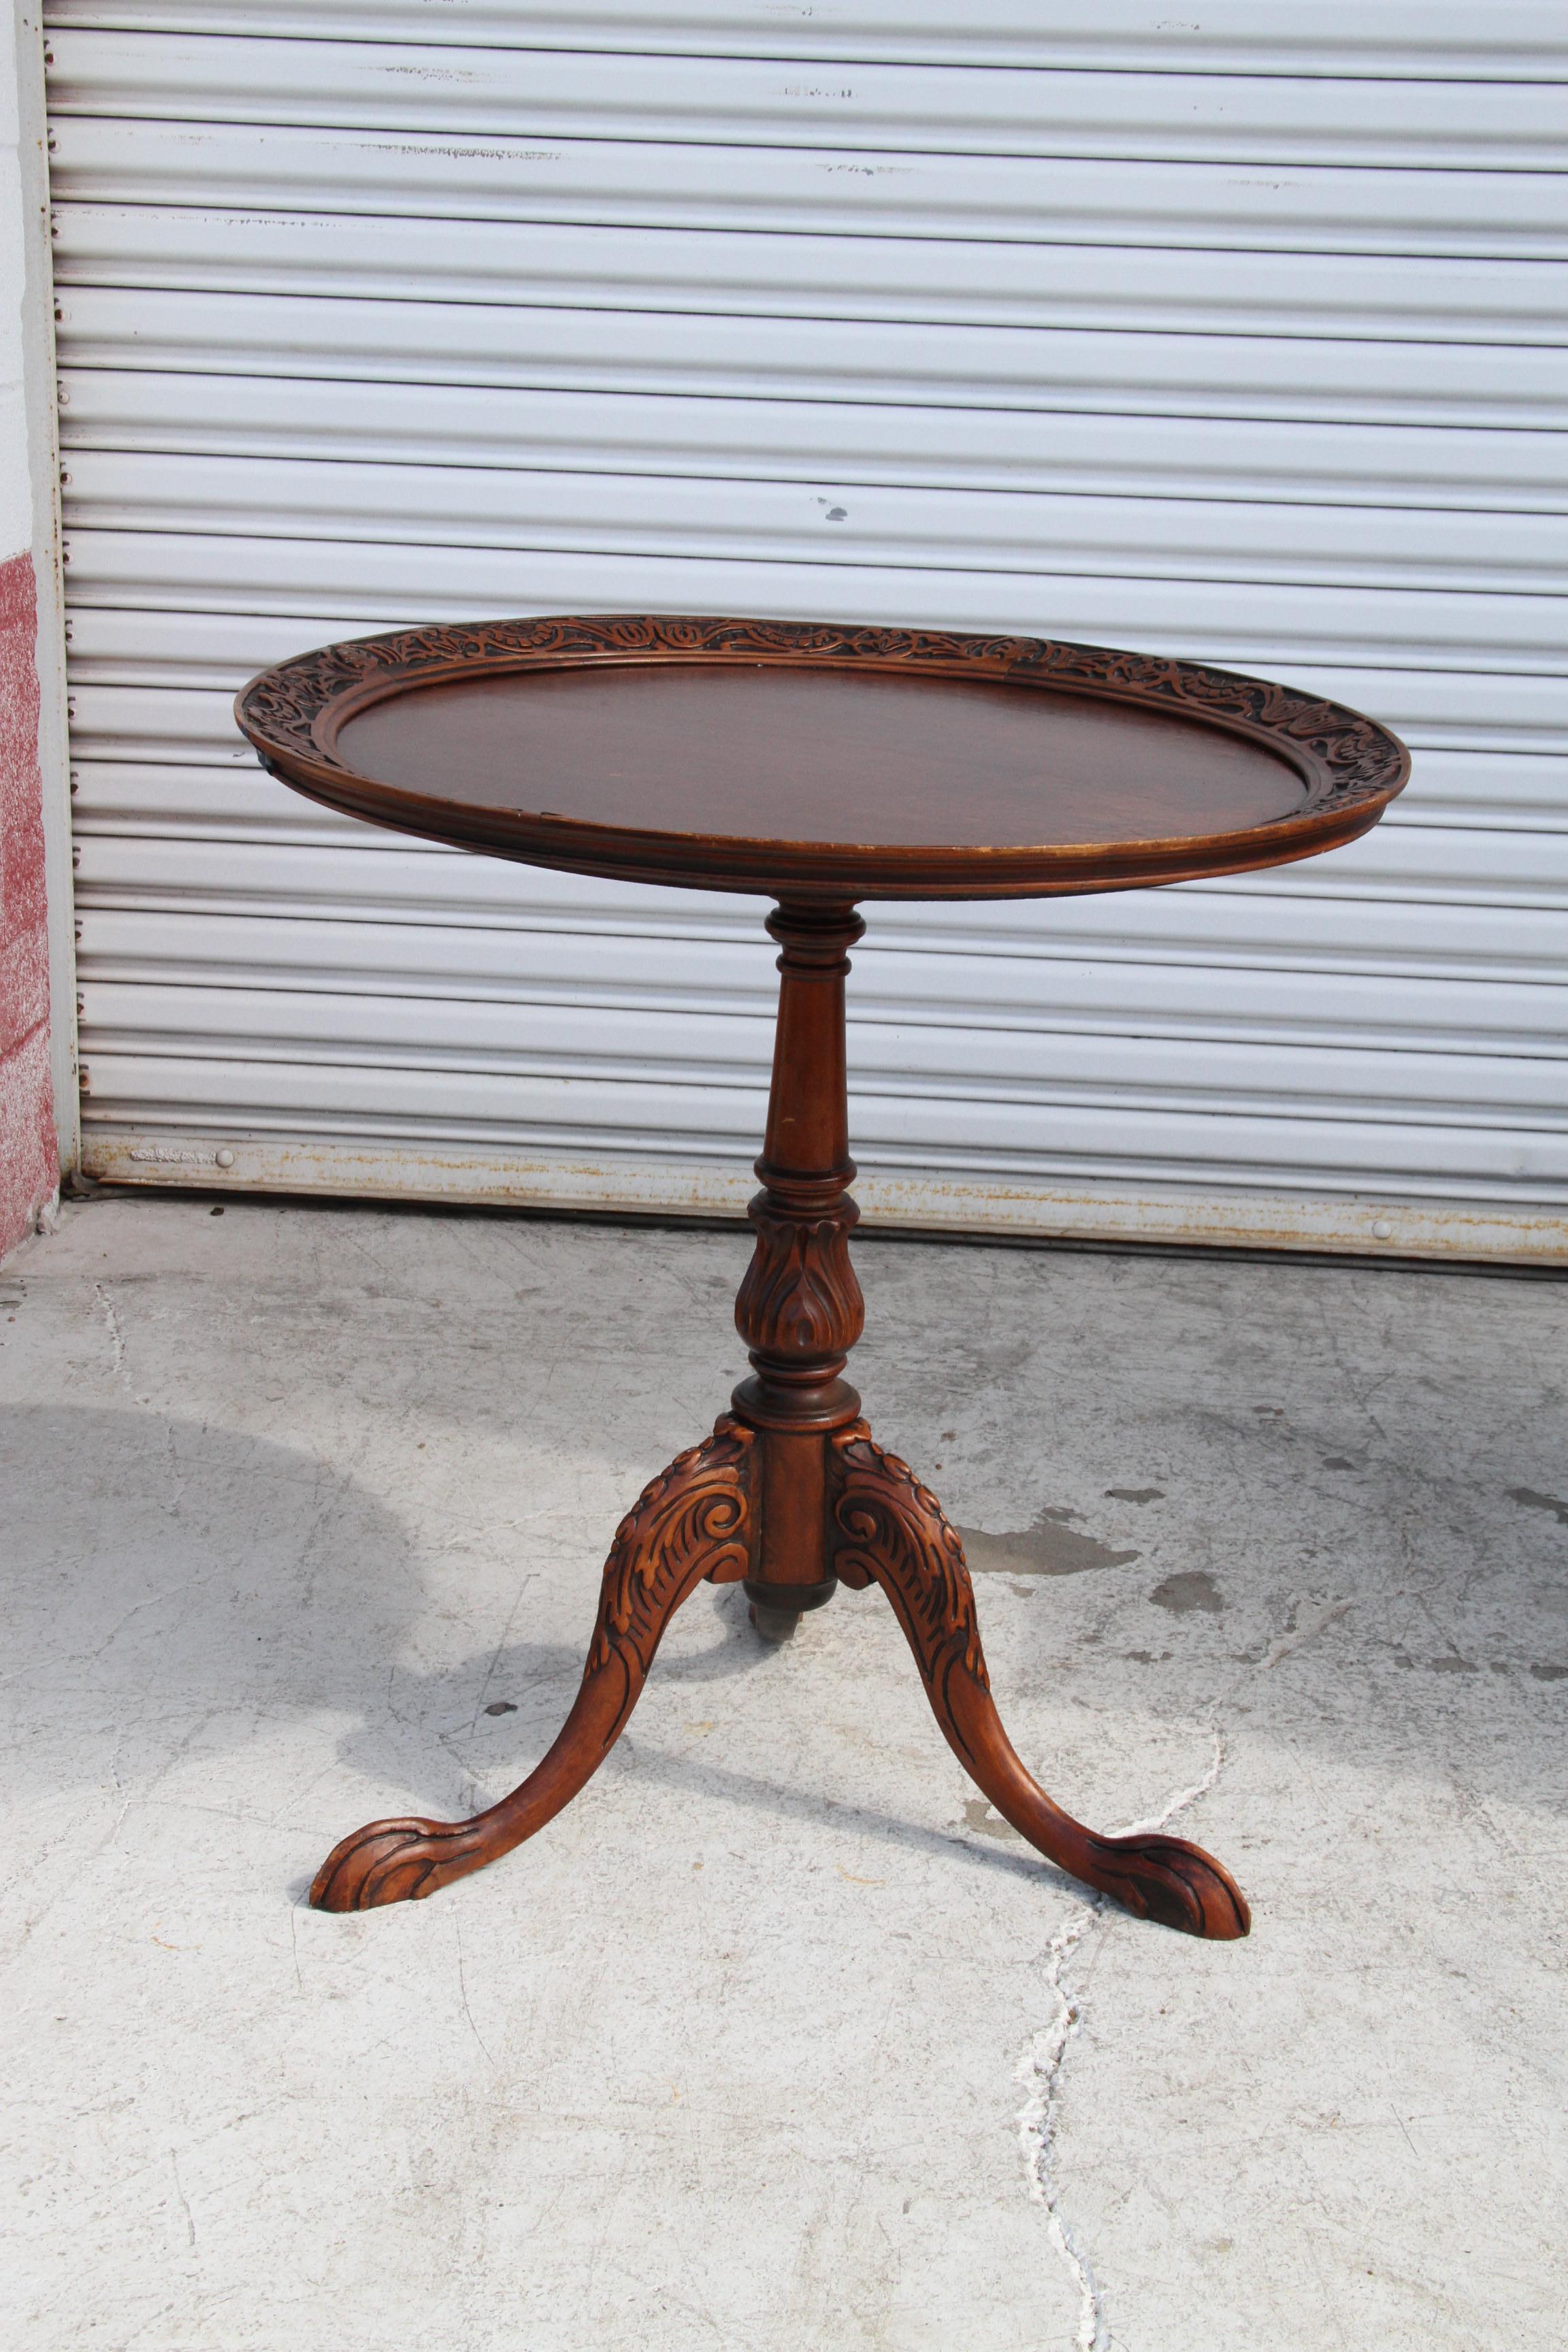 Vintage Solid Mahogany 29? Round Pie Crust Accent Table 

Ornately carved side table great for lamps or entries.
38? High
29? Diameter